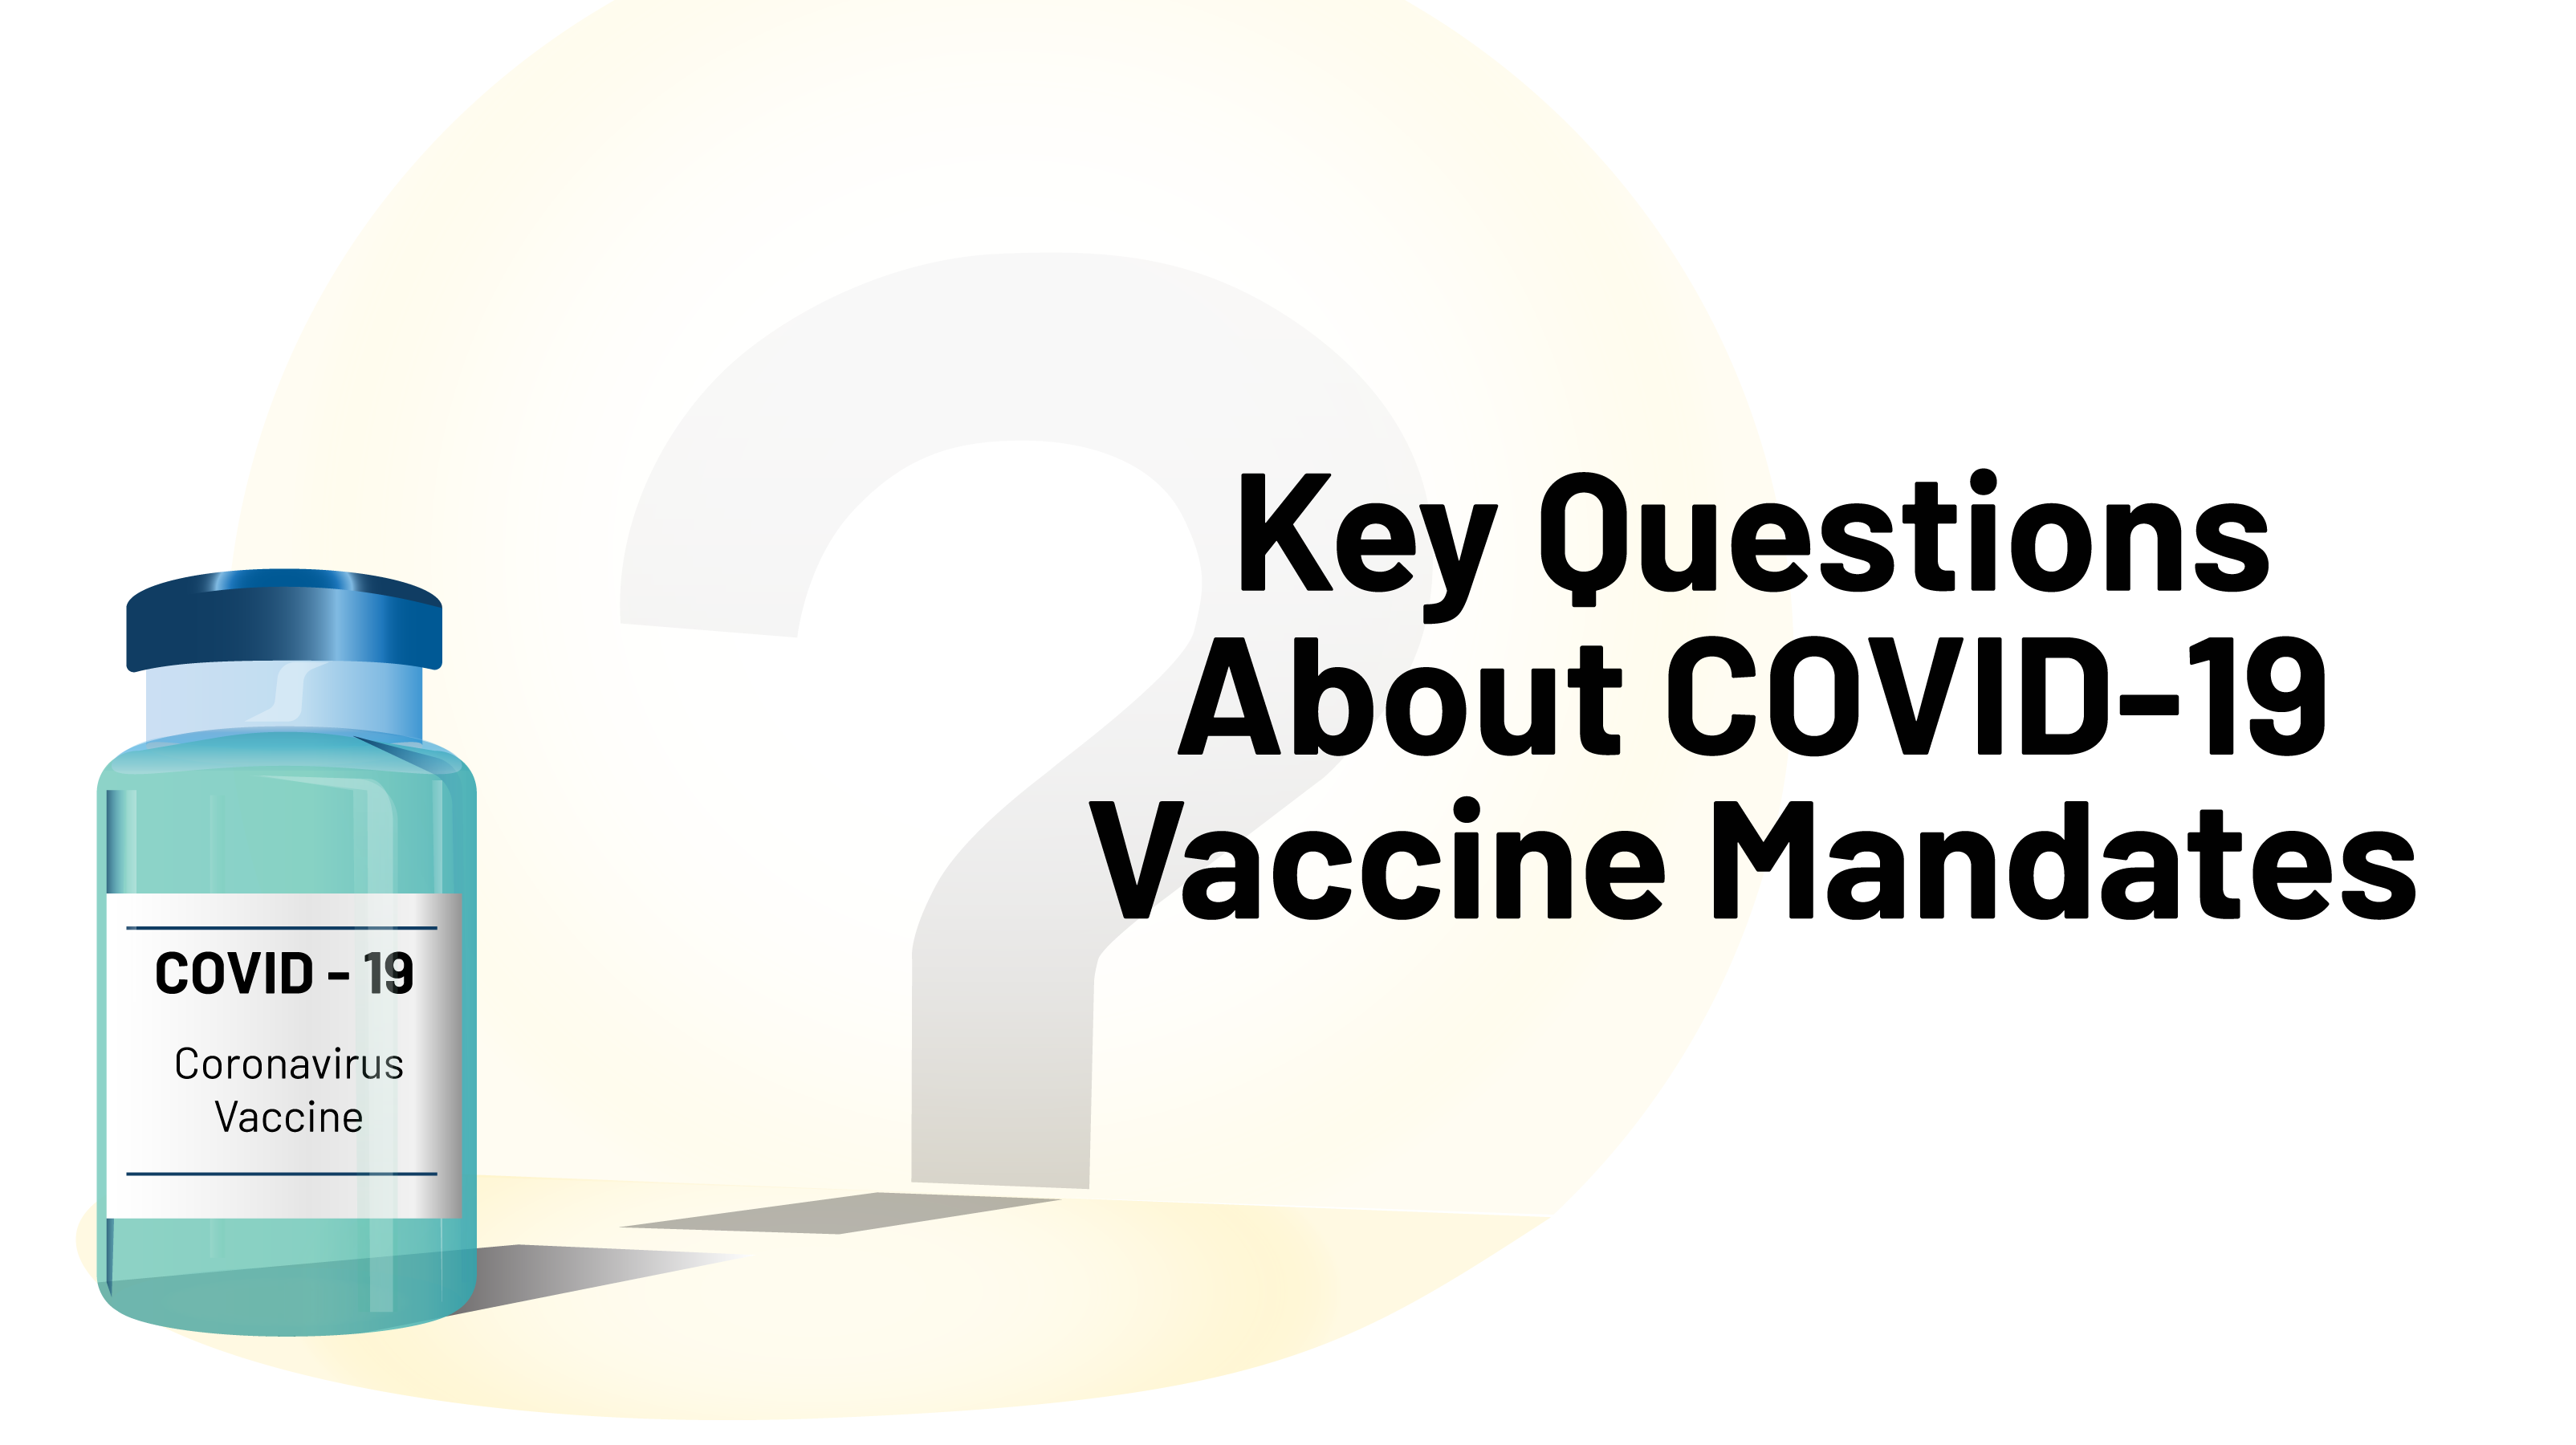 Key Questions About COVID-19 Vaccine Mandates